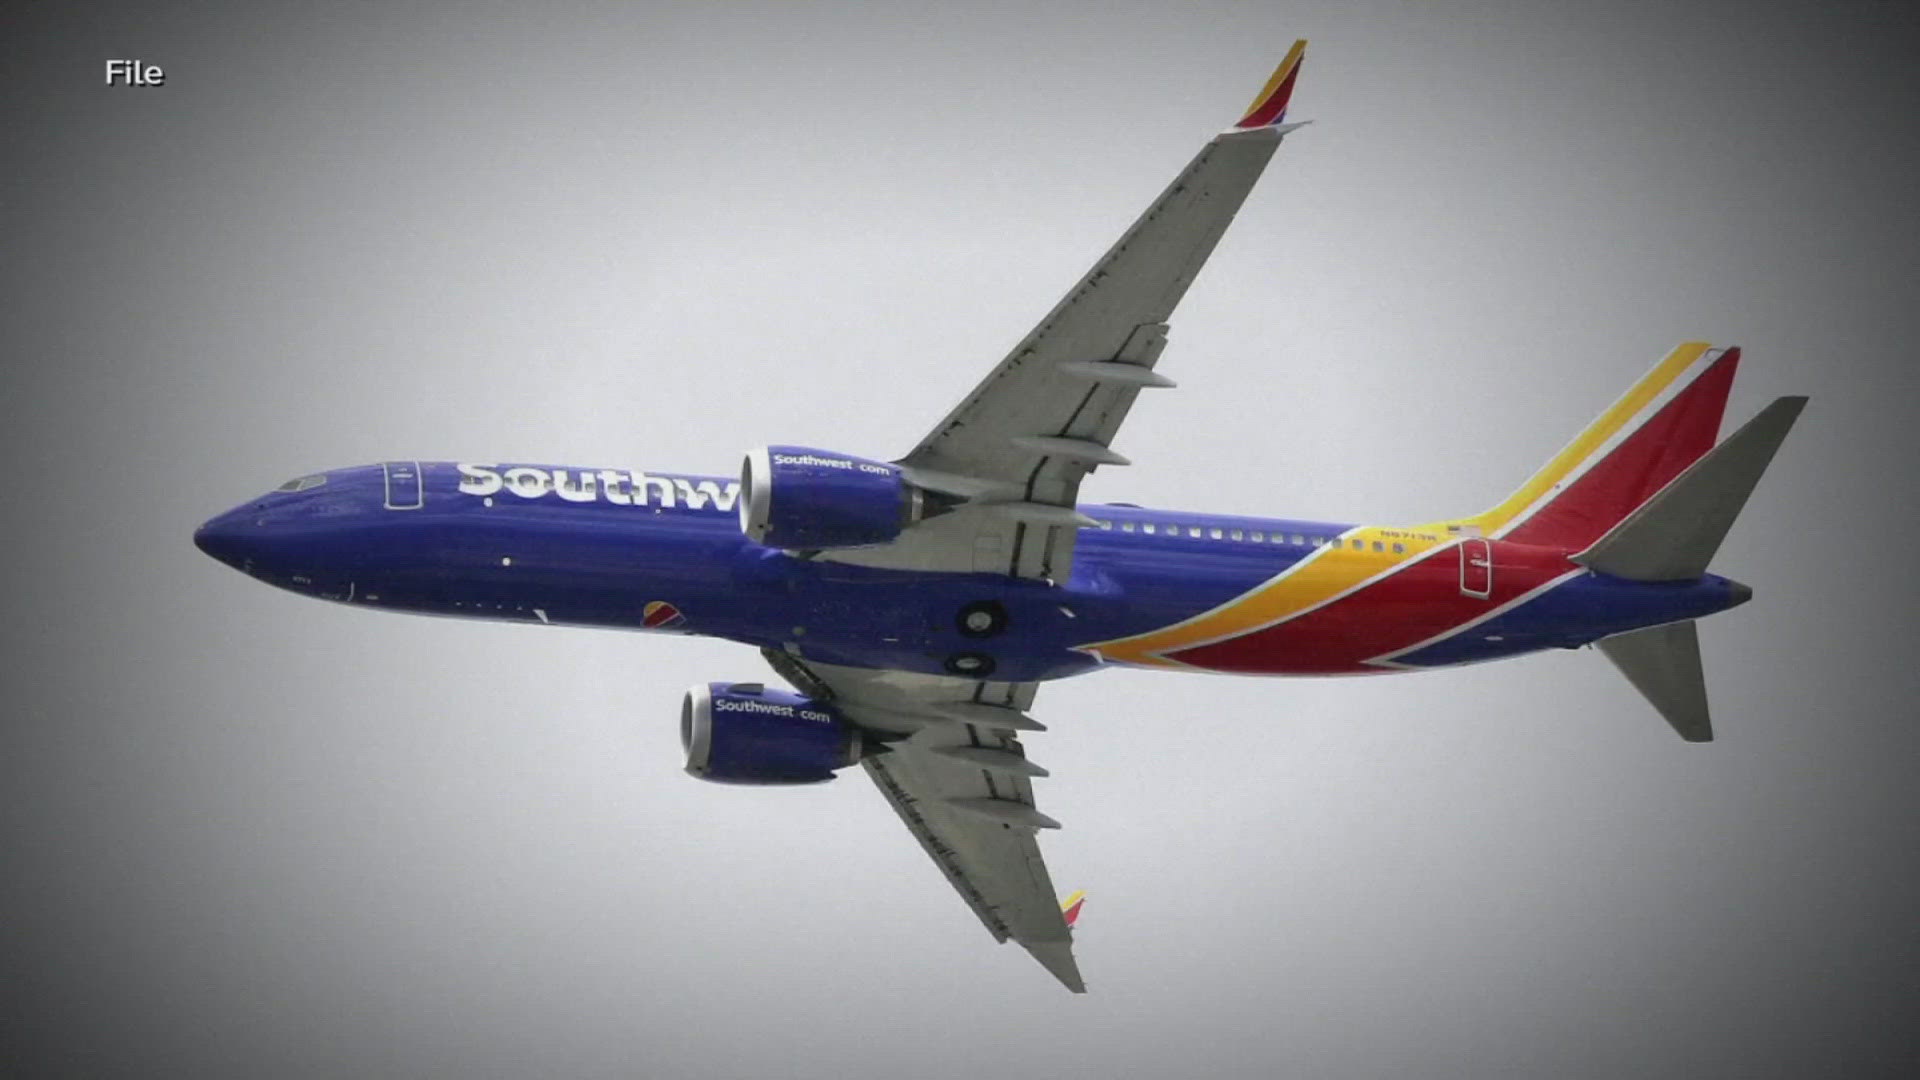 A Southwest plane dropped dangerously close to a high school as it descended into Oklahoma City's airport.